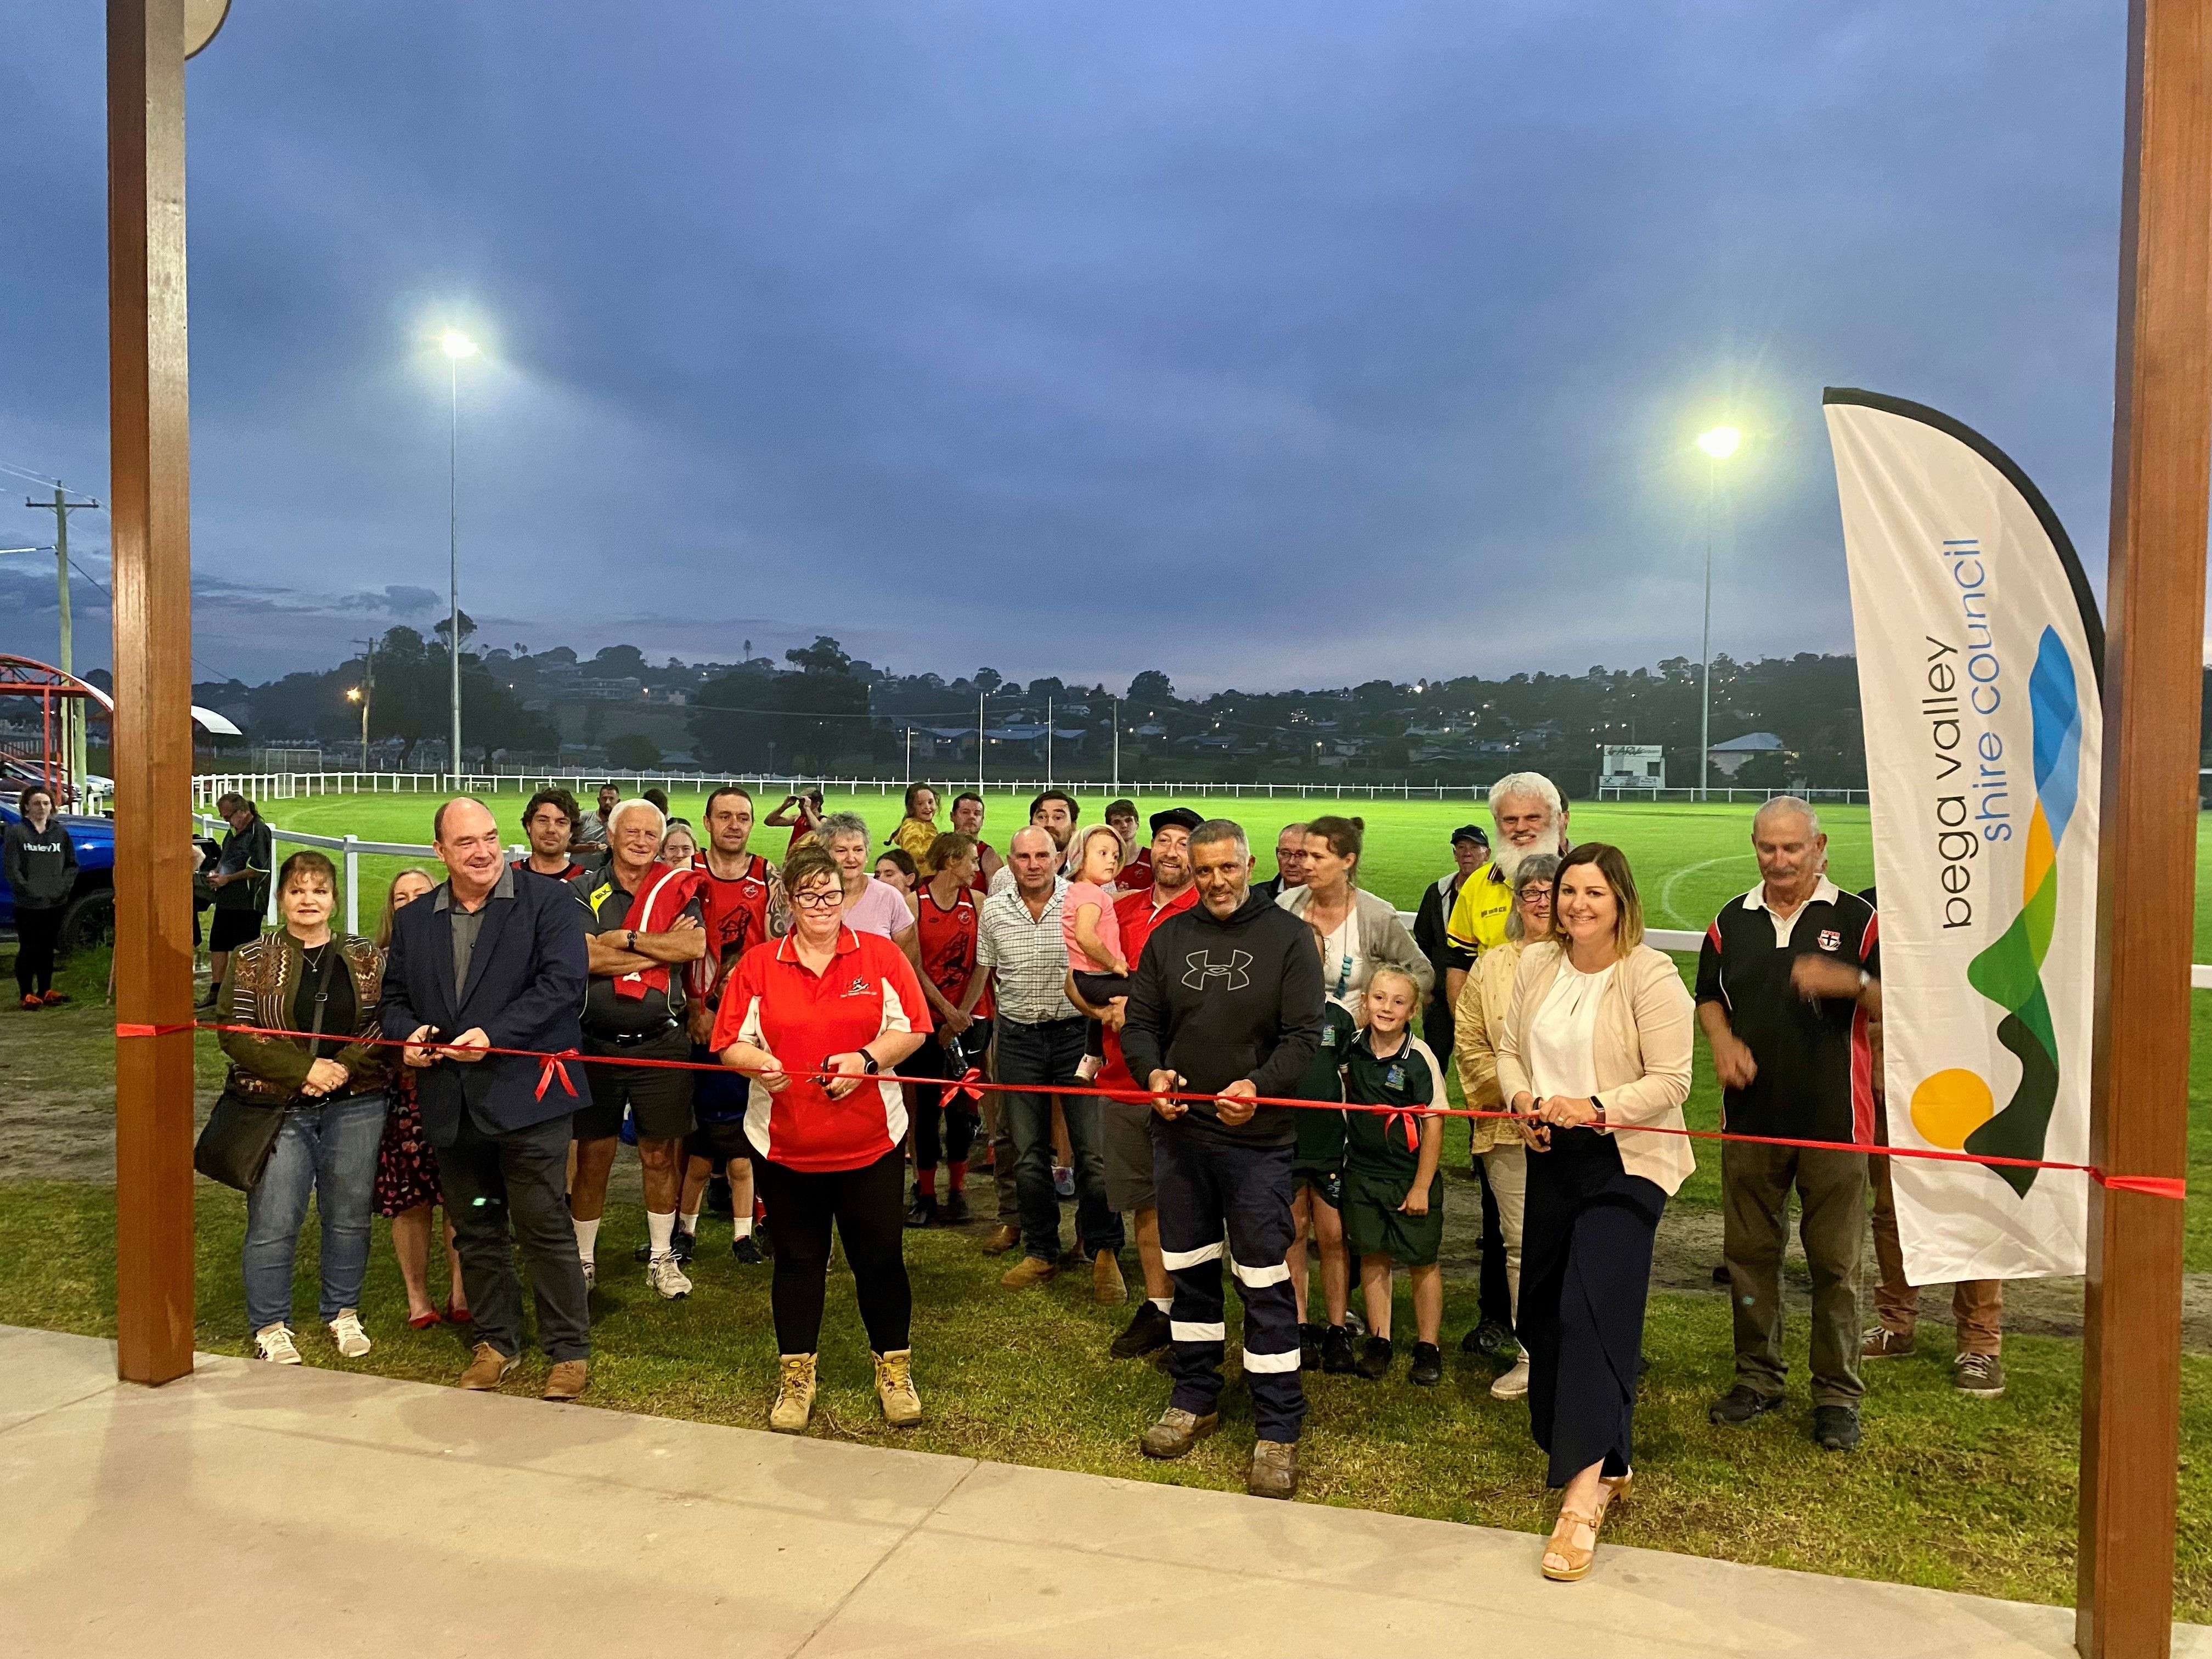 'Exciting' new sportsground pavilion opens for Eden's clubs and community